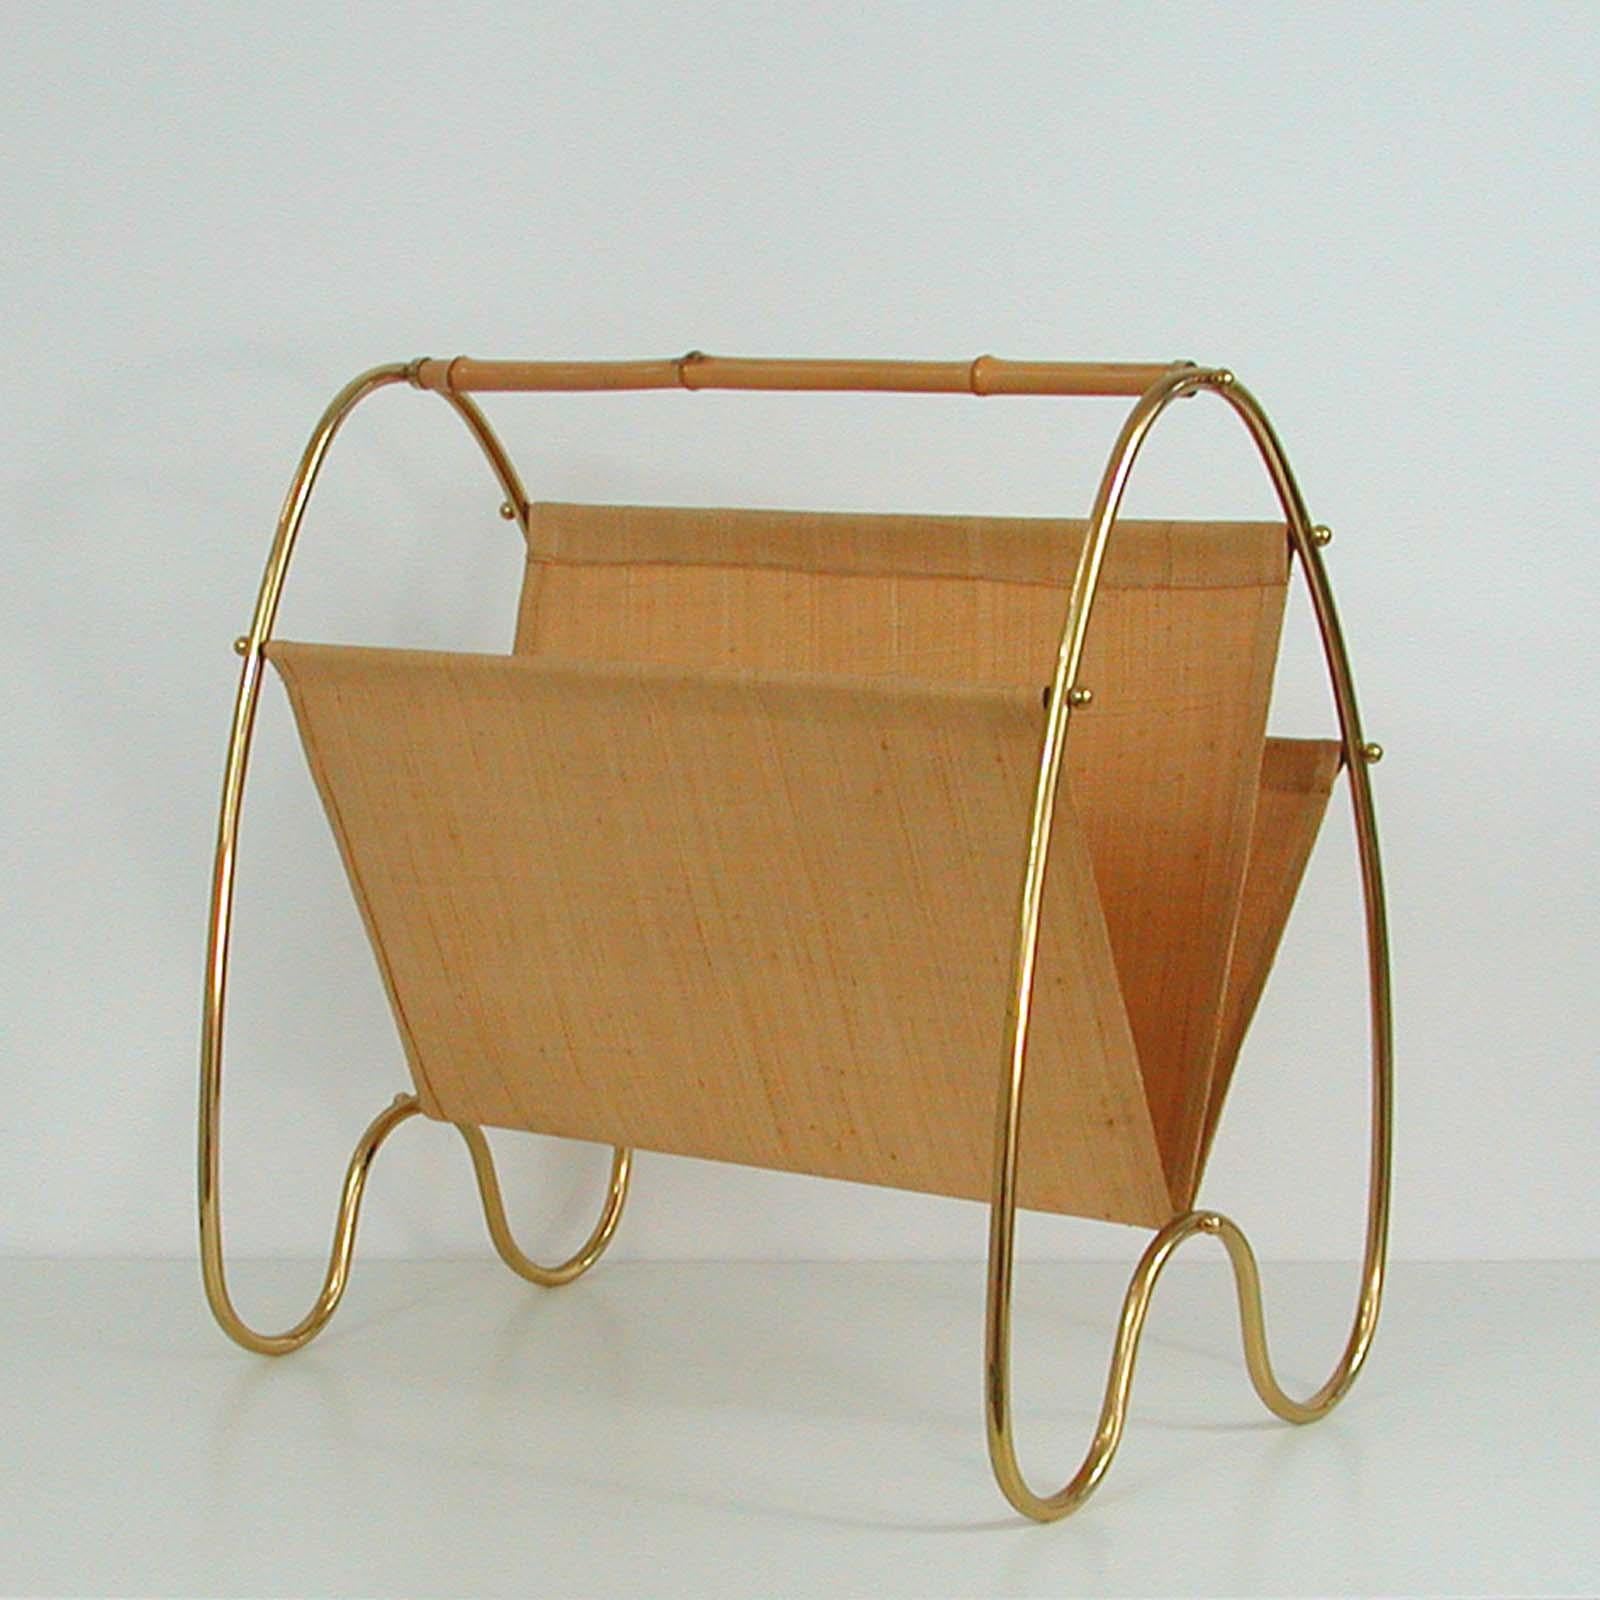 This Carl Auböck style magazine rack was made in Austria in the 1950s. It features a curved brass base and a bamboo handle. The three magazine pockets are made of woven bamboo fabric. 

The rack is in very good vintage condition with minor signs of